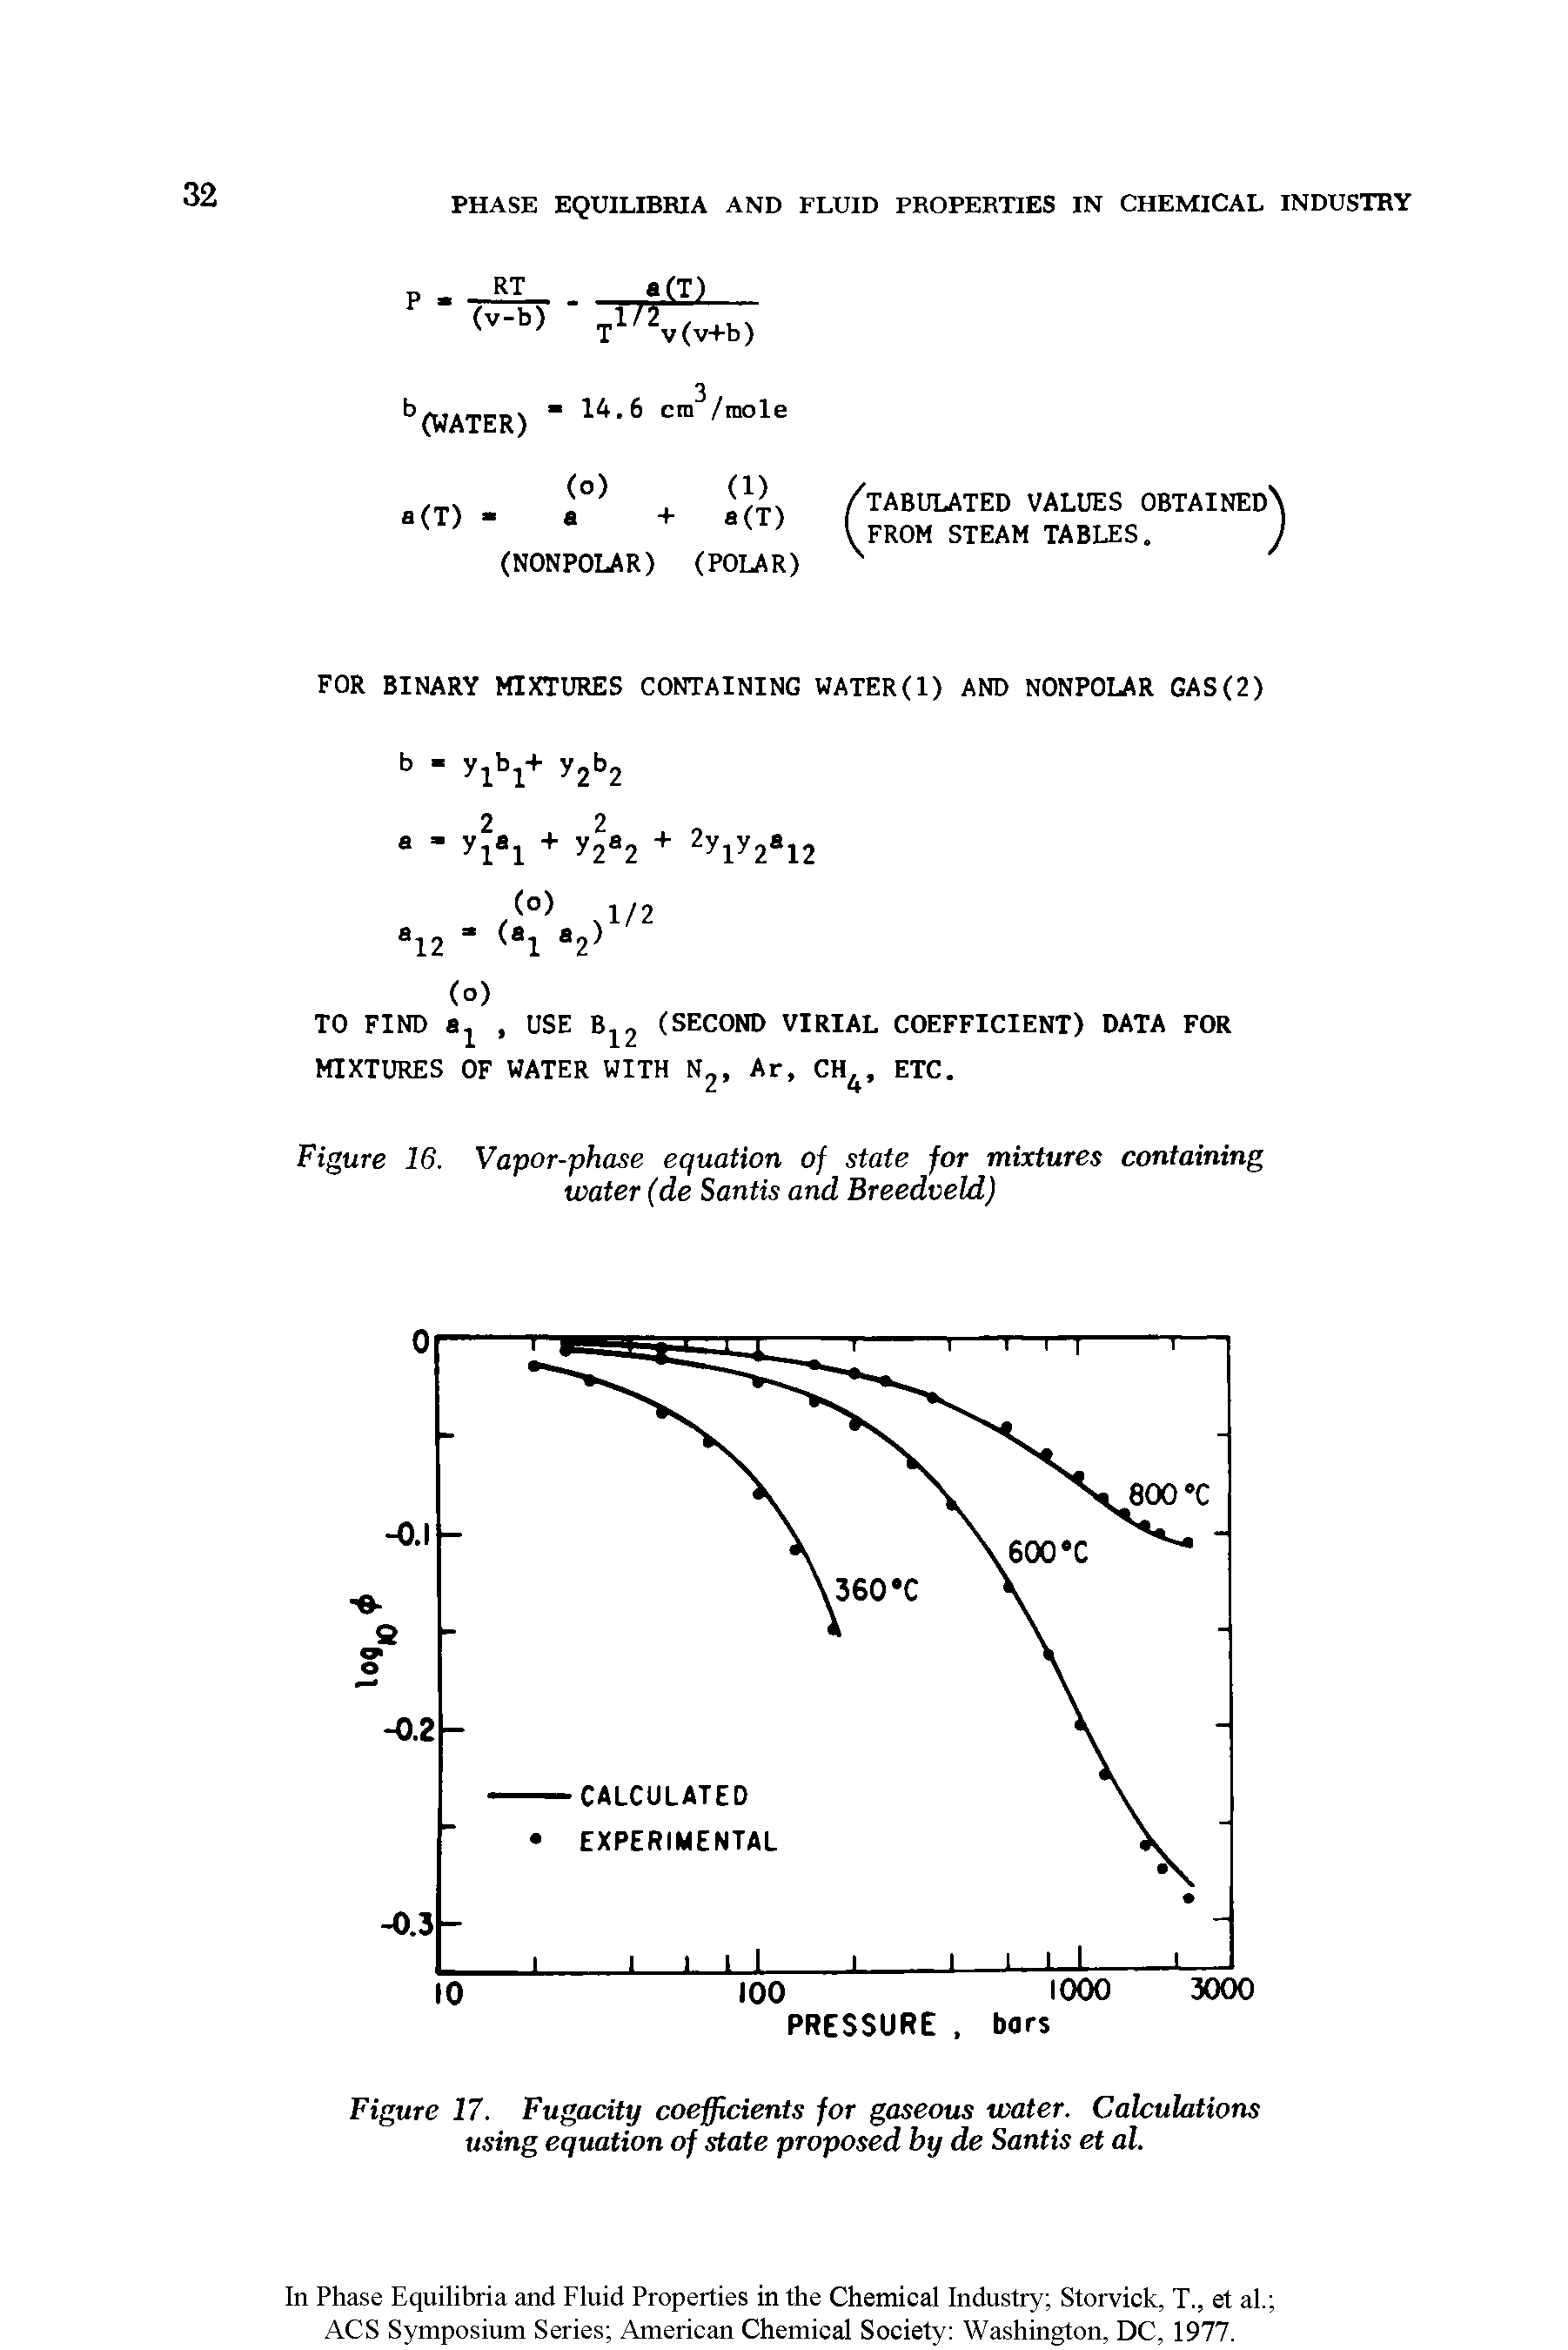 Figure 16. Vapor-phase equation of state for mixtures containing water (de Santis and Breedveld)...